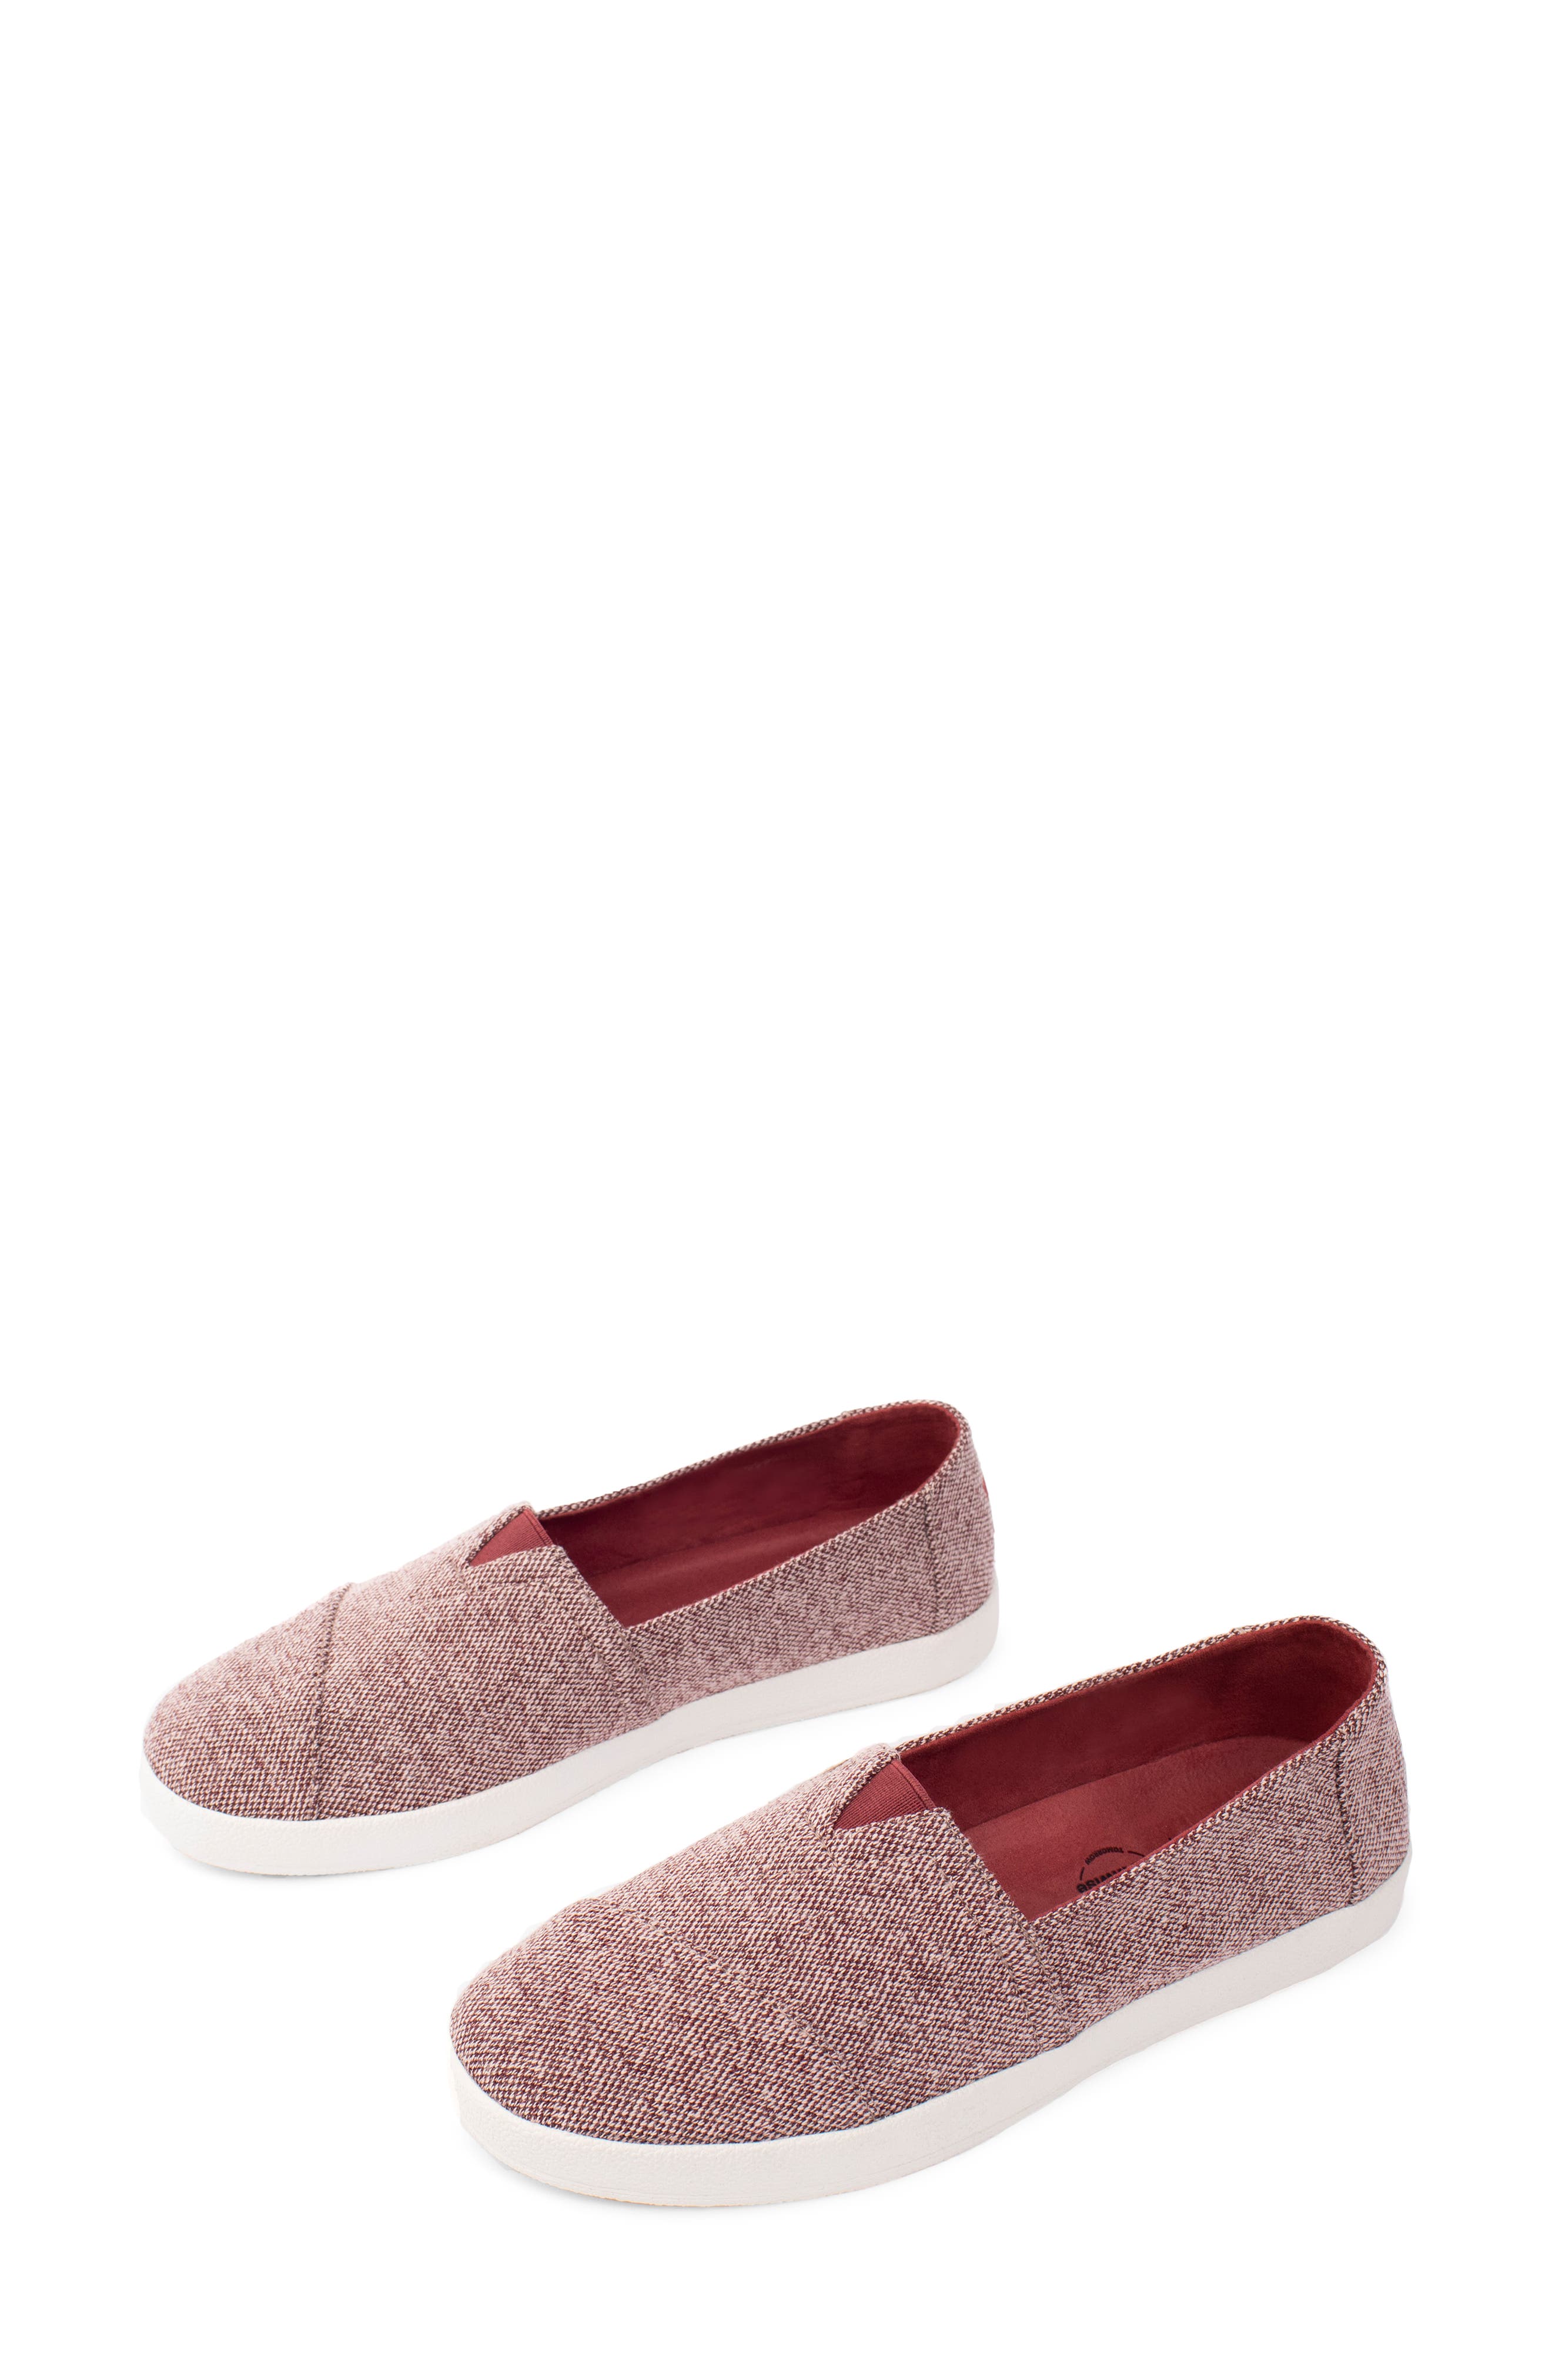 toms womens shoes wide width